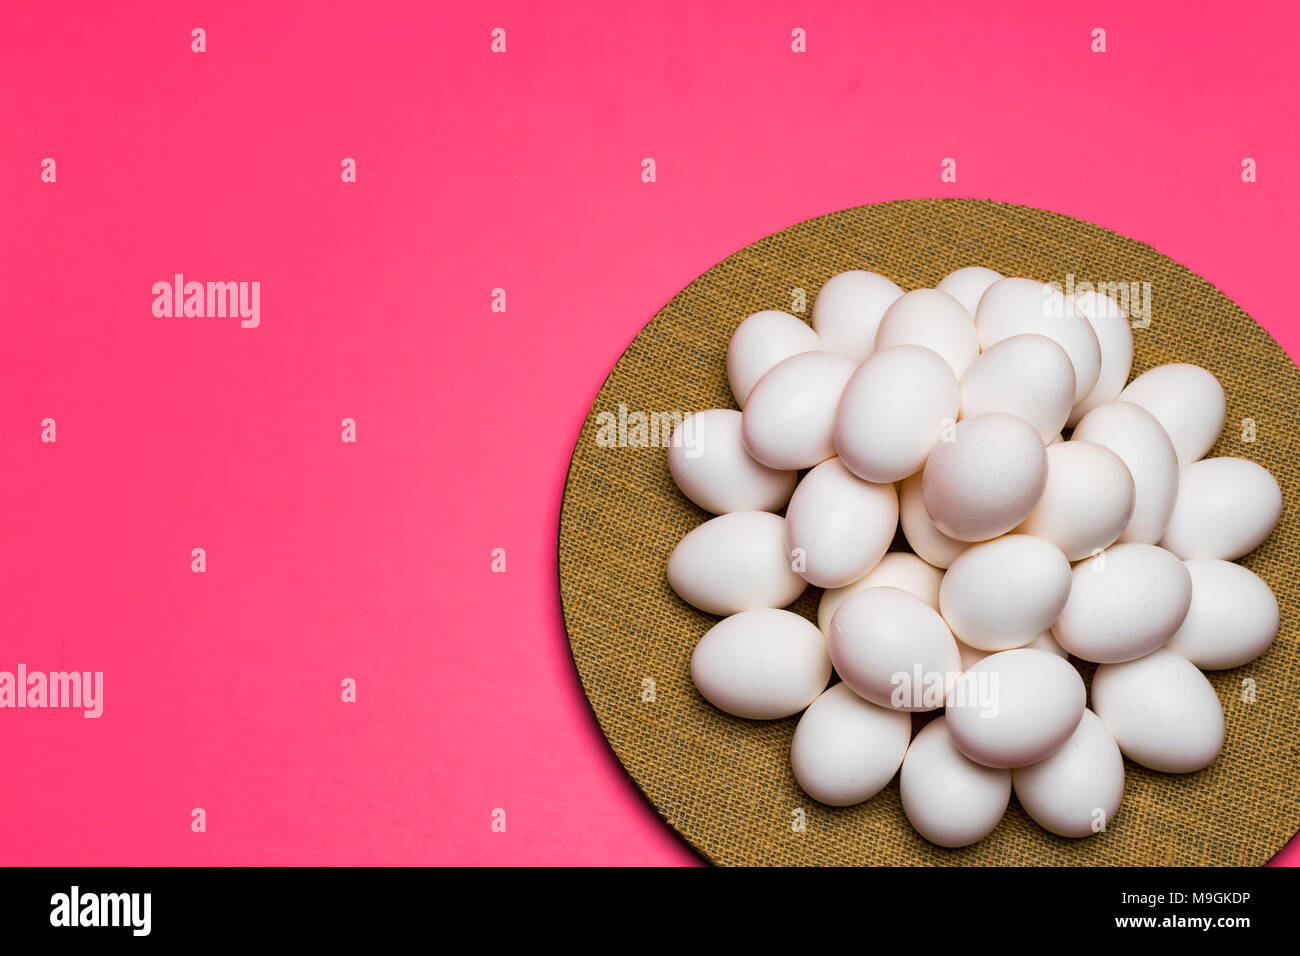 2 dozen uncolored Easter Eggs with a pink pastel background with negative space on a plate ready to be colored. Stock Photo